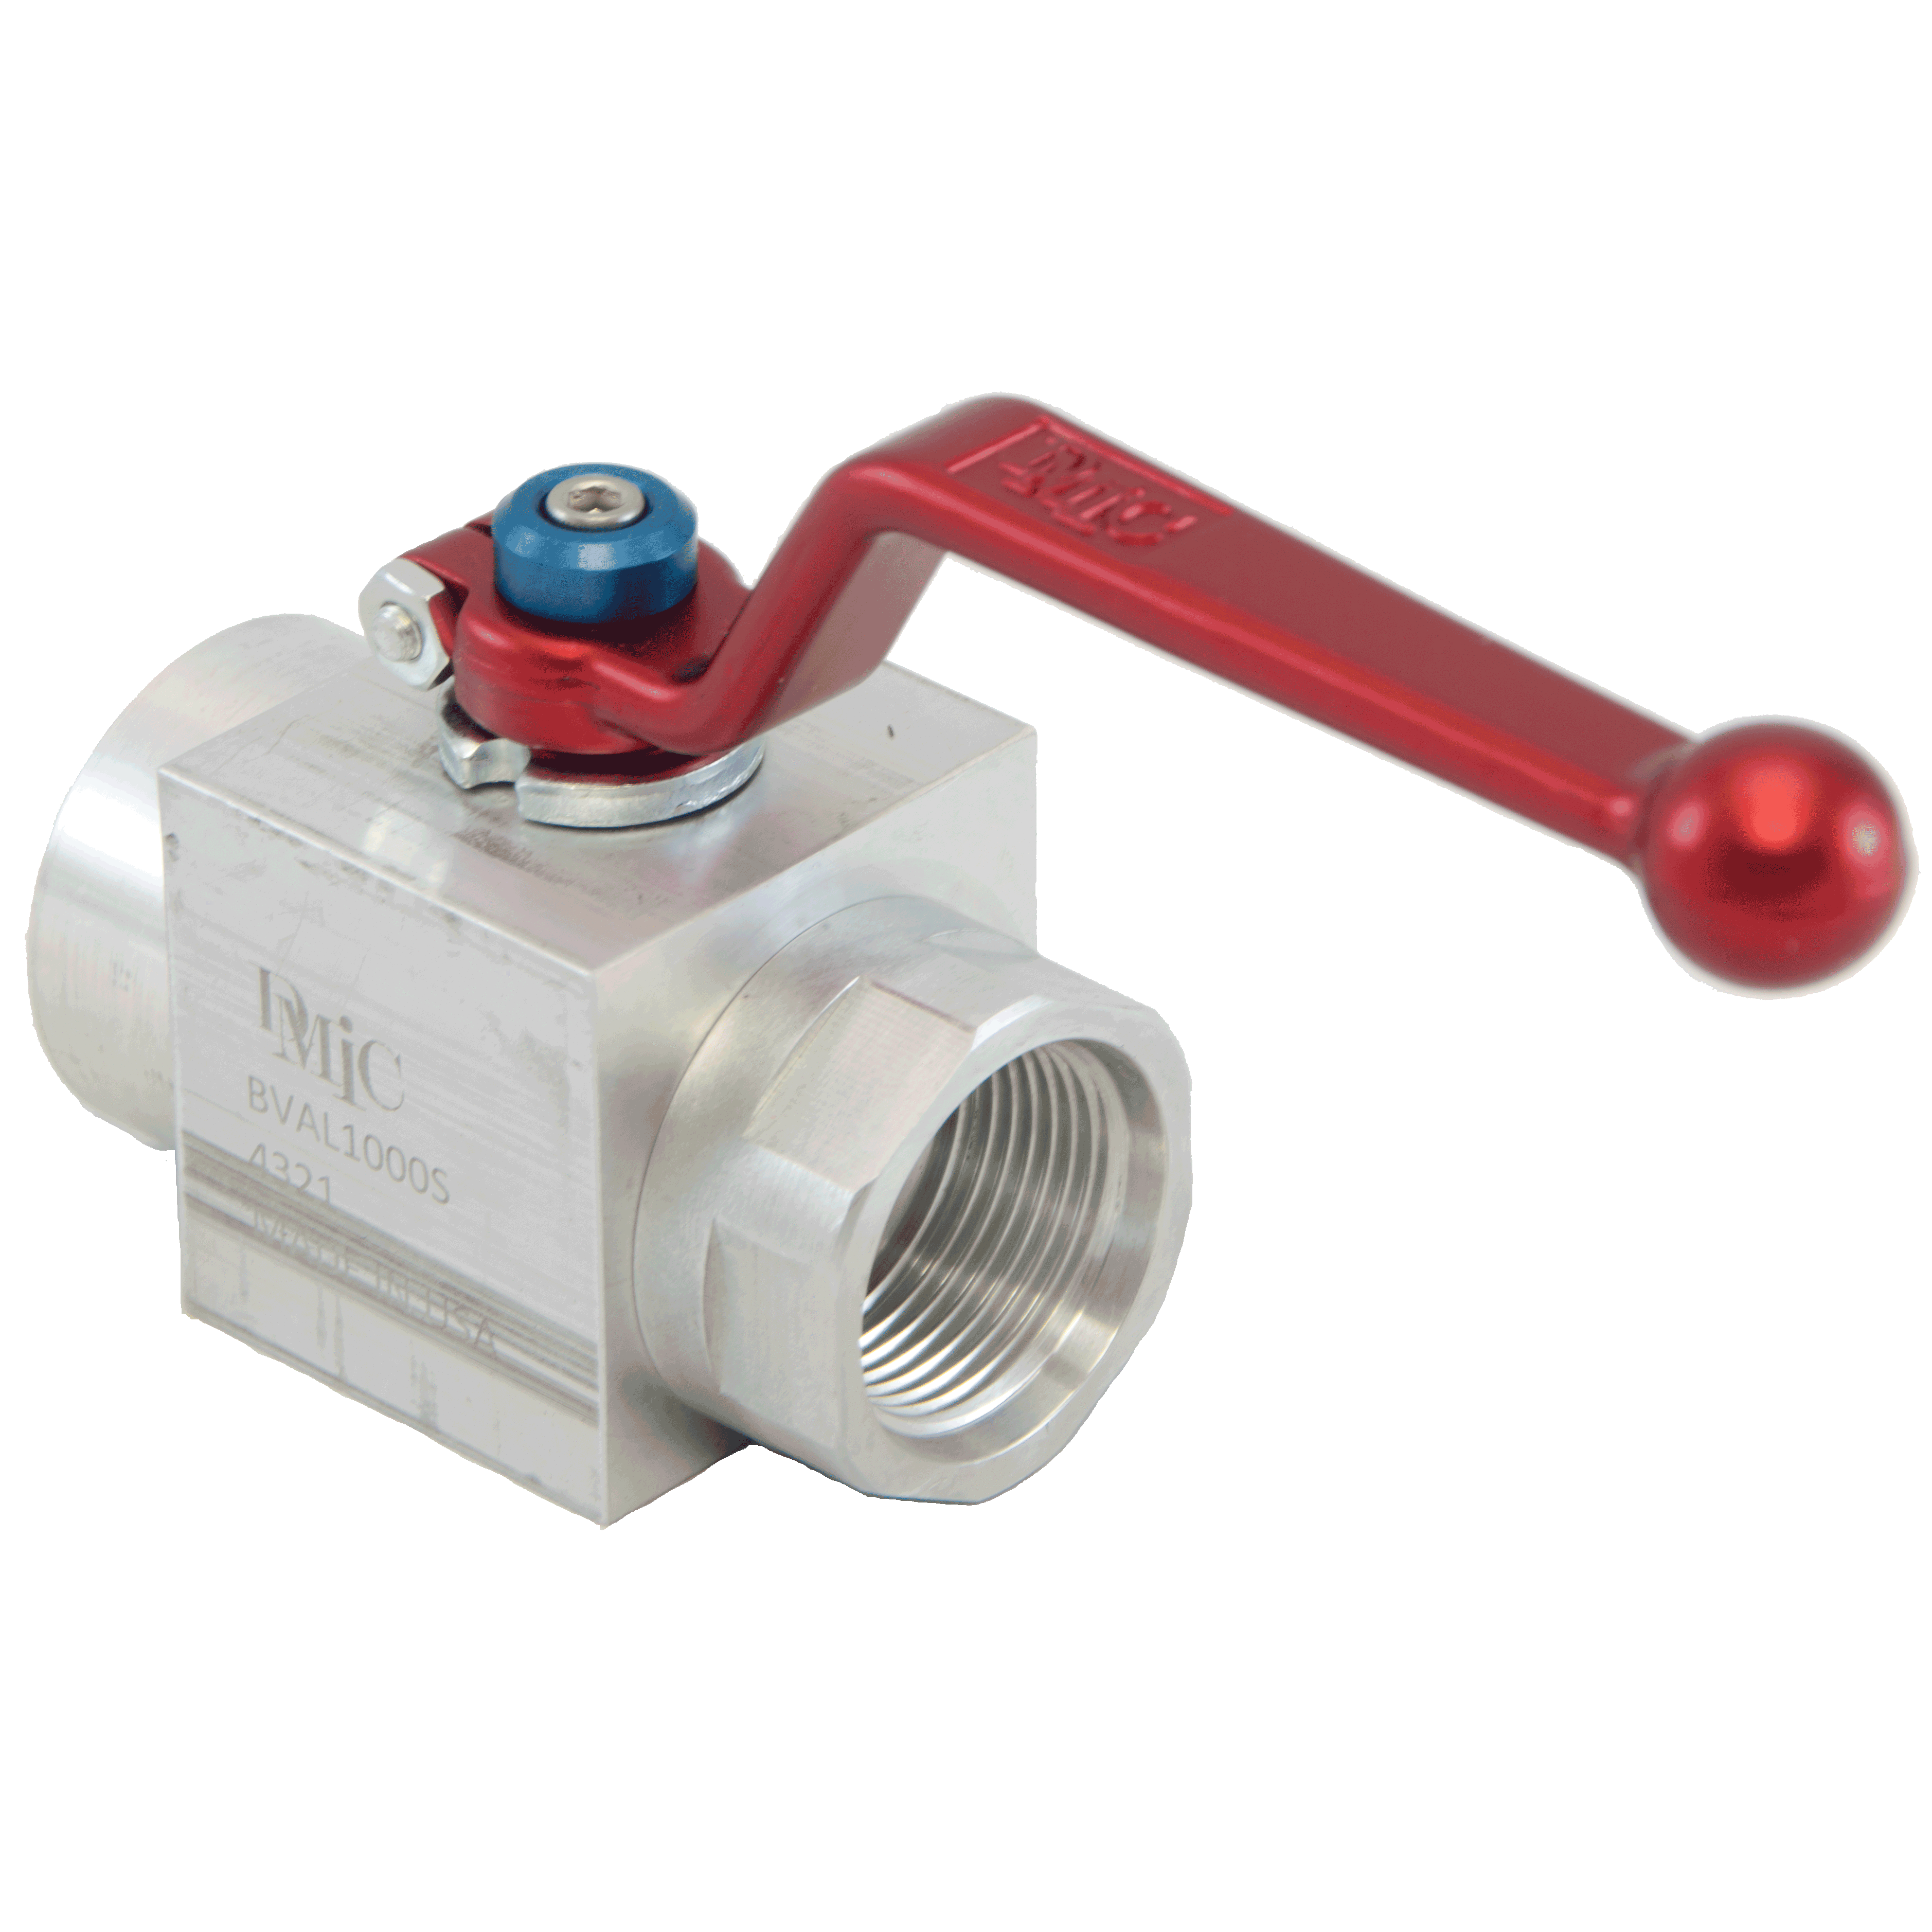 BVAL-1000N-4321 : DMIC Suction Ball Valve, 1 NPT, Aluminum, 600psi, Two-Way